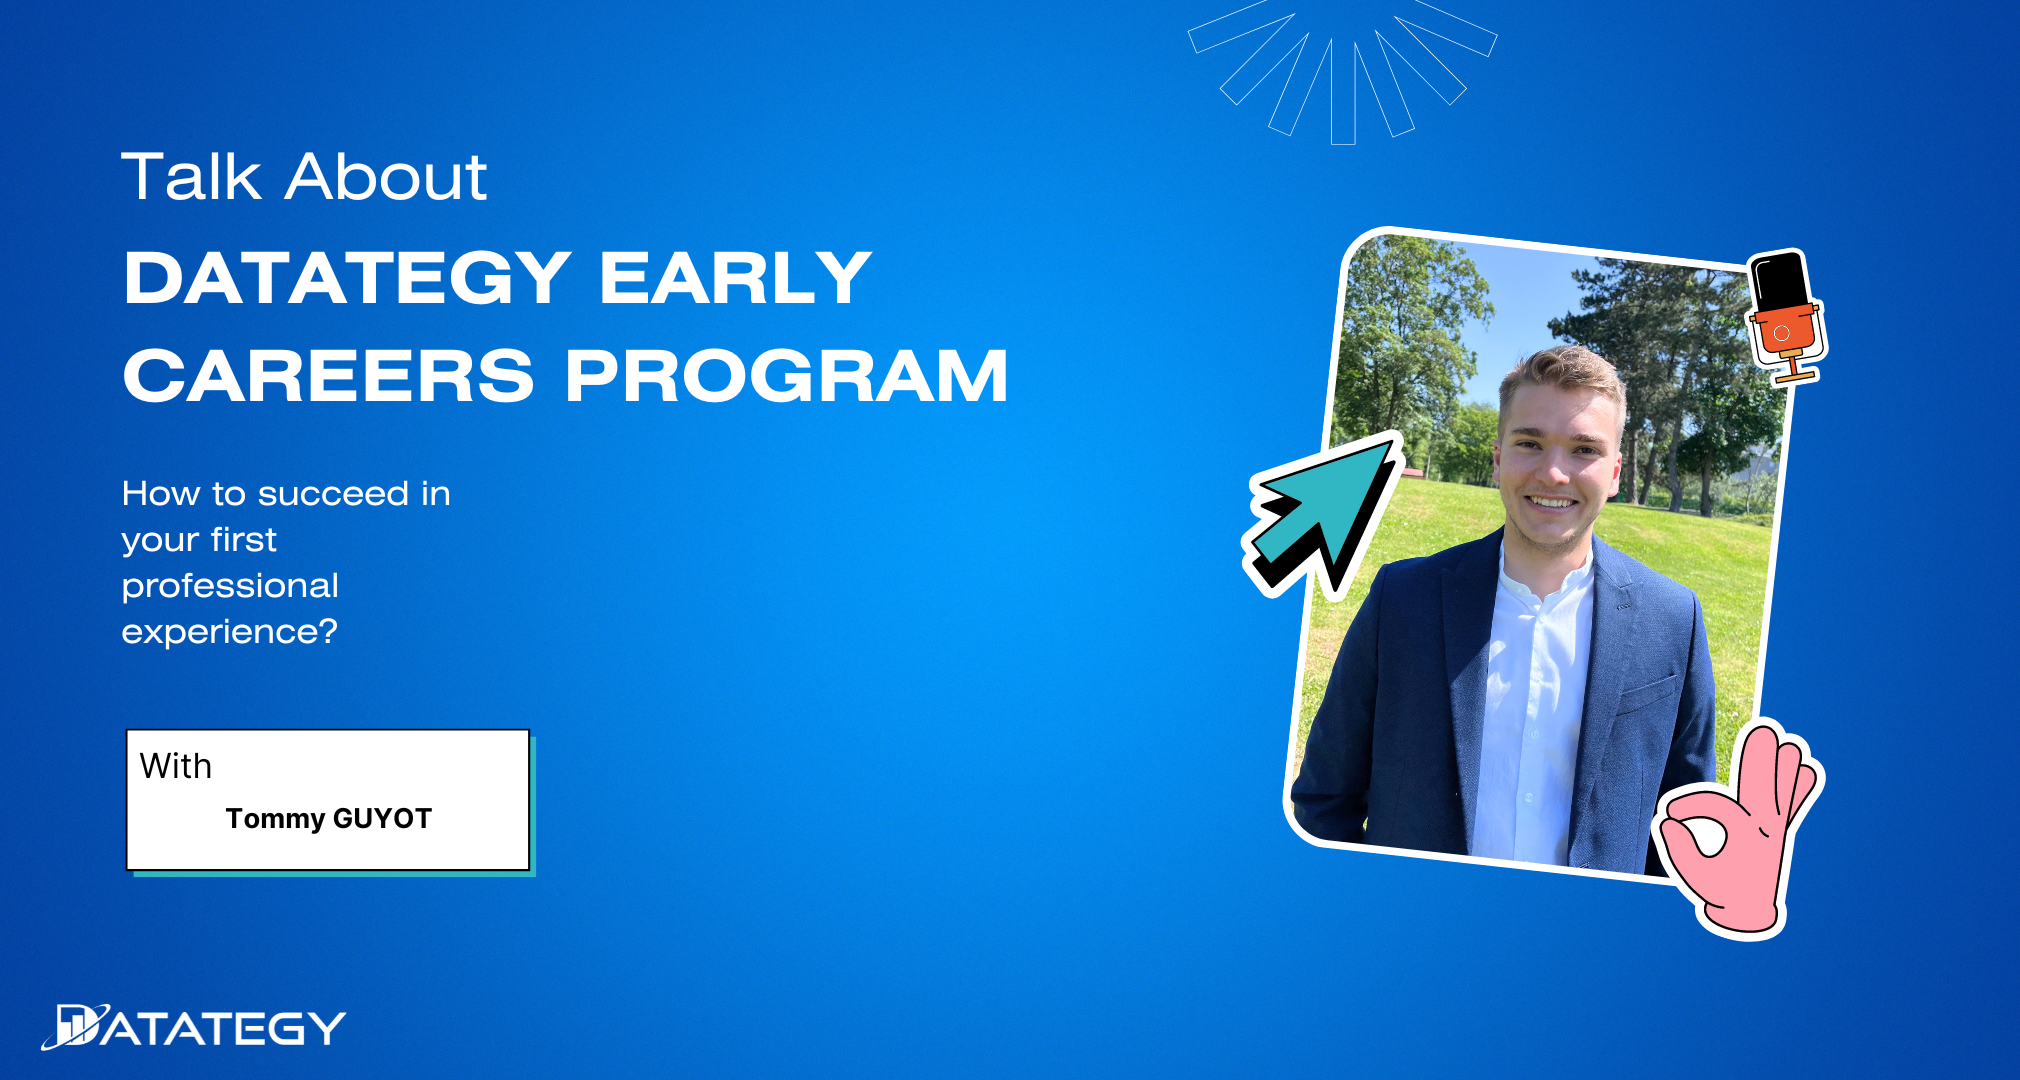 "DATATEGY EARLY CAREERS PROGRAM" With Tommy GUYOT